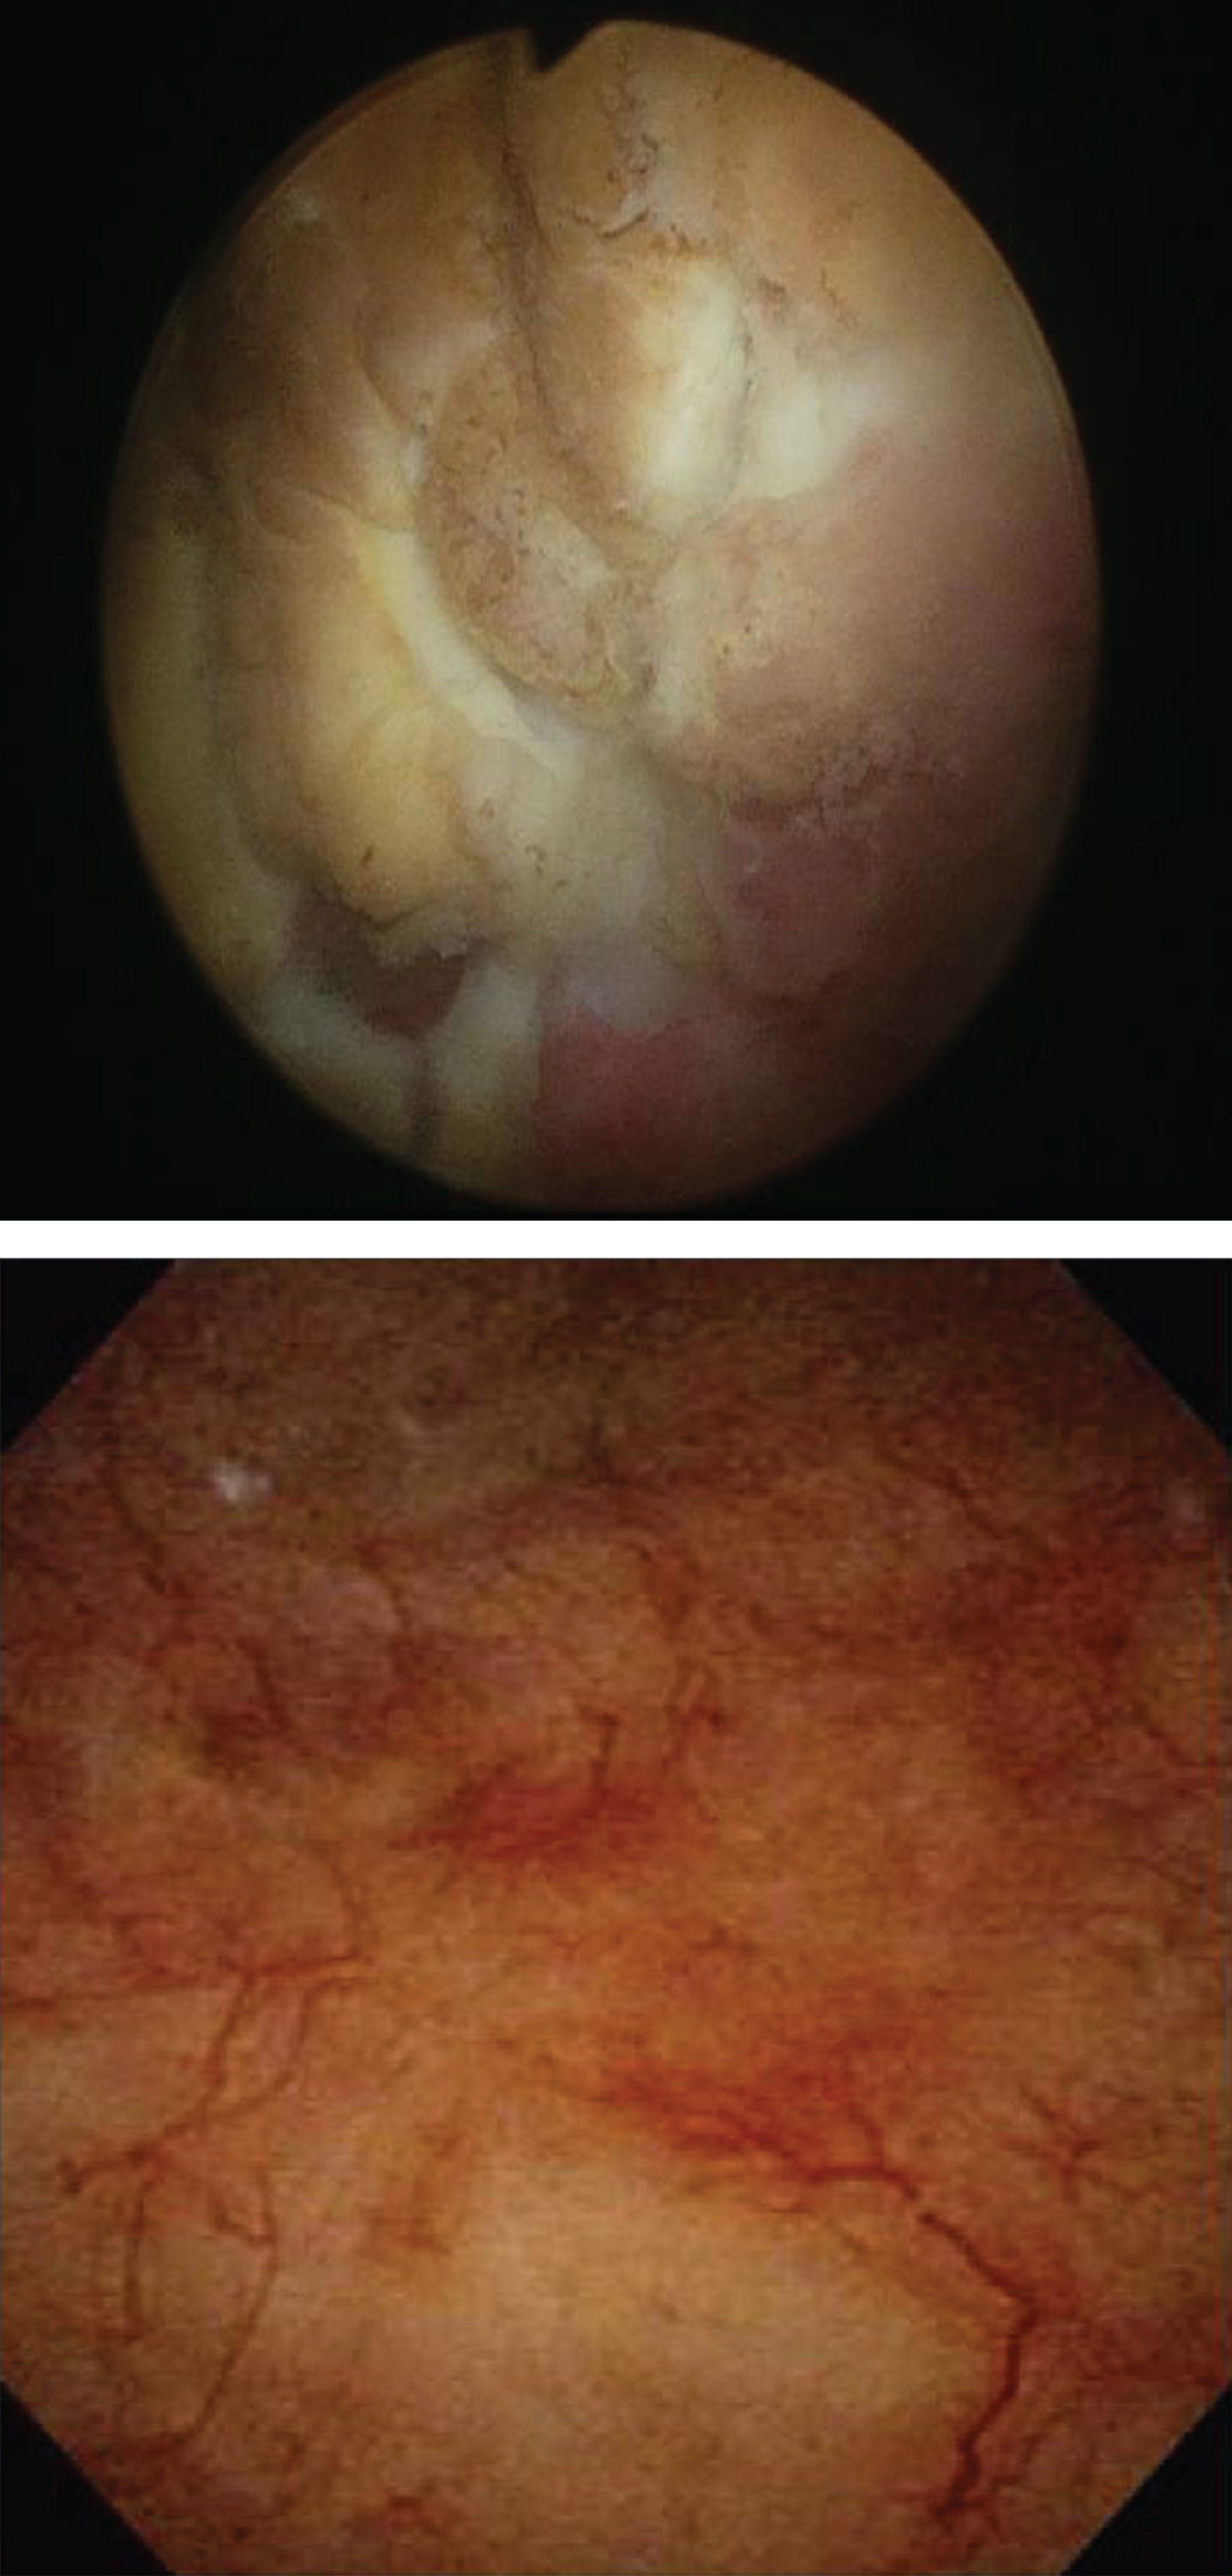 Cystoscopic images: Mitomycin-C induced cystitis pre- and post-treatment (top and bottom respectively) utilizing the algorithm.